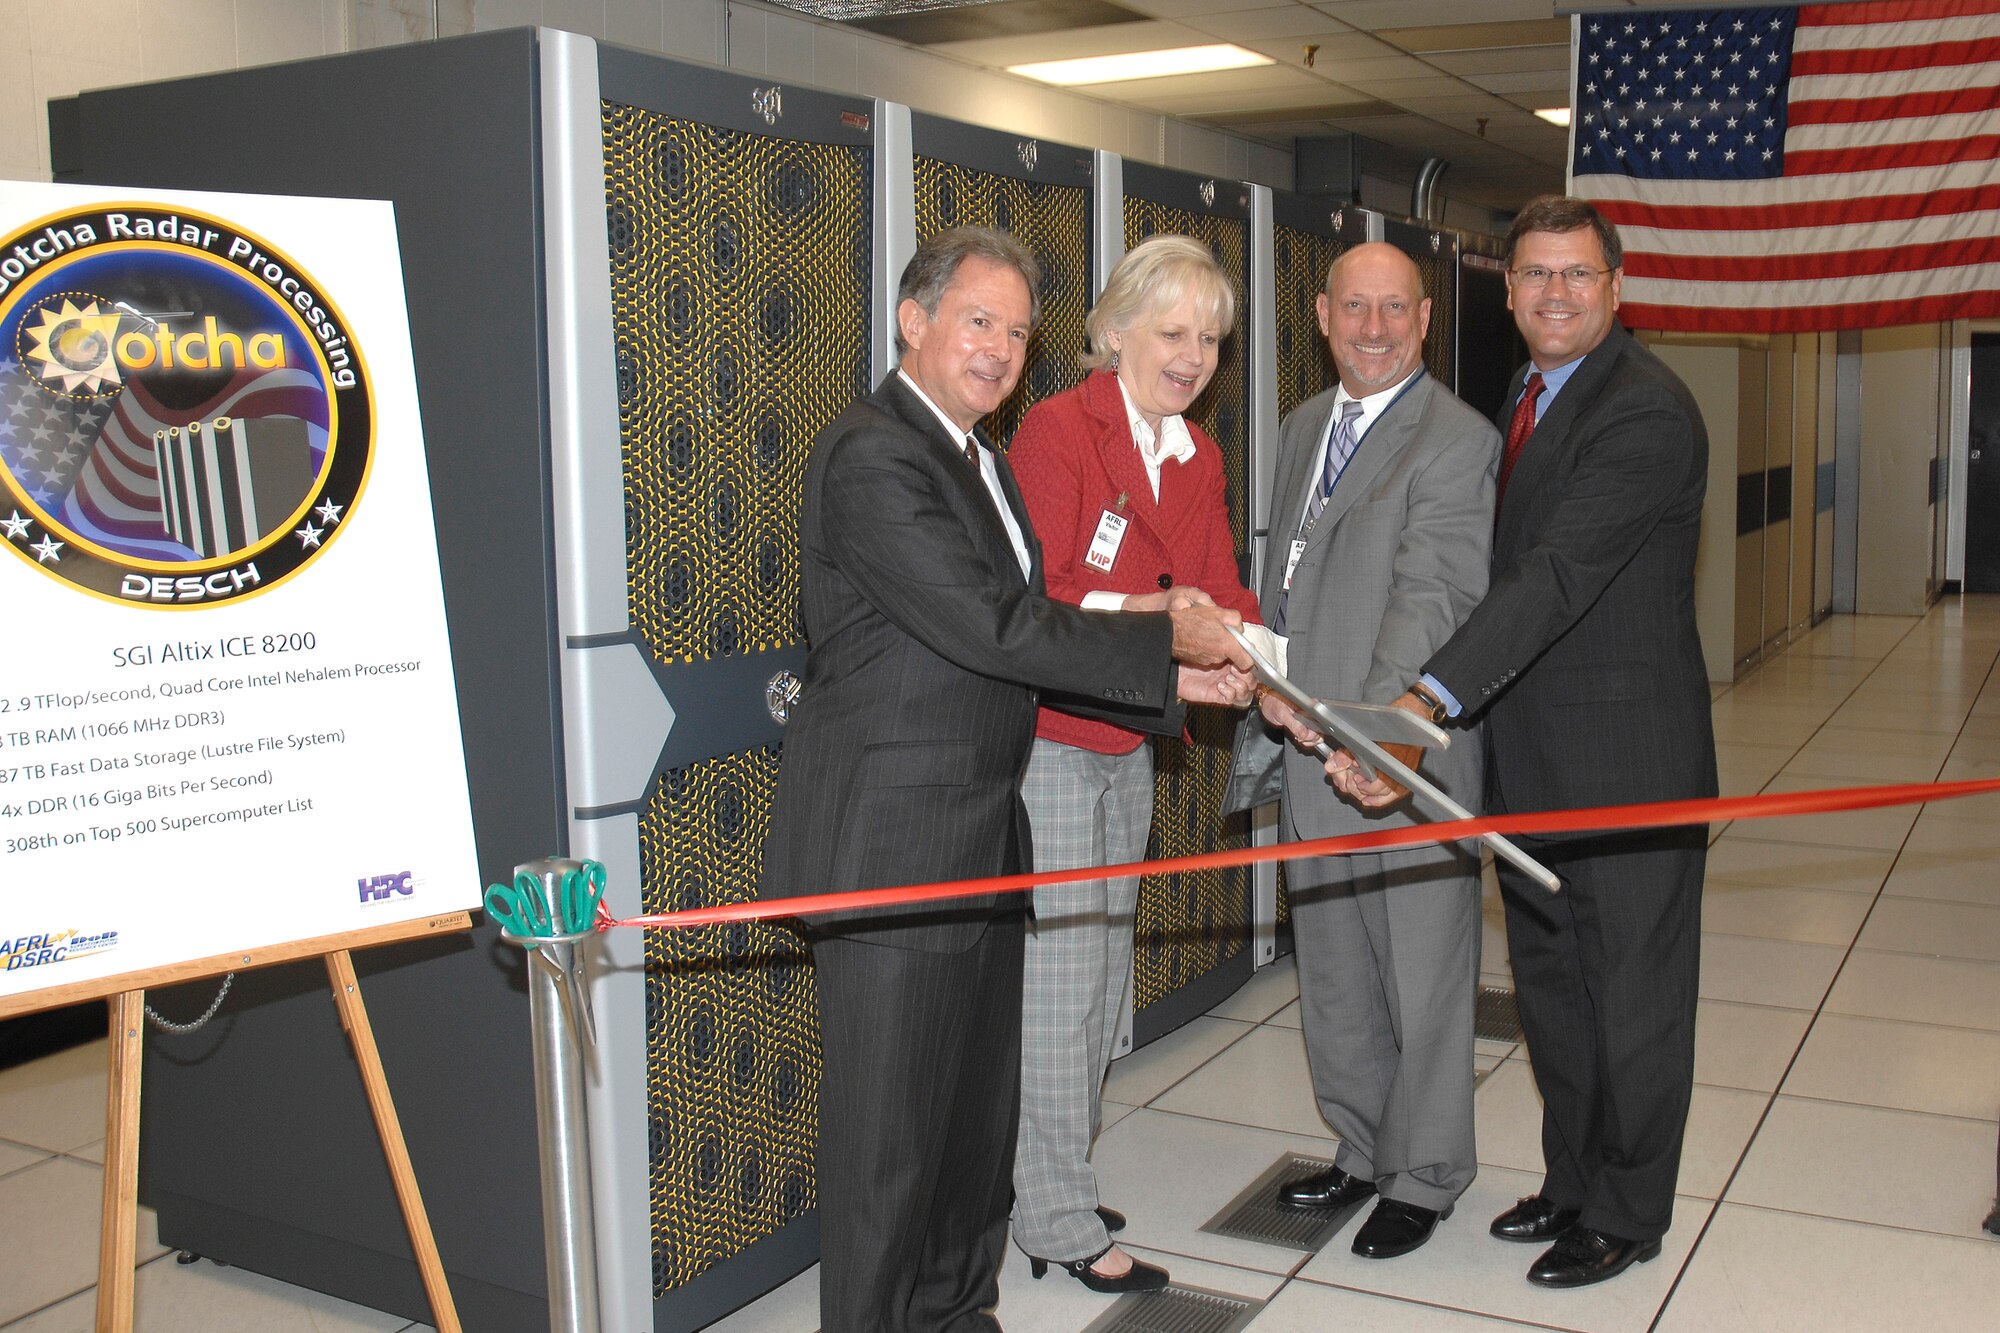 Distinguished visitors dedicate Desch, an SGI Altix ICE 8200 supercomputer, during a ribbon cutting ceremony August 31 at Wright-Patterson Air Force Base.  The new supercomputer is named after Joseph Desch, a Dayton, Ohio engineer who developed computing machines during World War II to decipher German Enigma-coded communications.  It will be used to translate real-time synthetic aperture radar data from the Gotcha radar system being developed by the Air Force Research Laboratory into high-resolution 3D images.  Pictured from left to right are Dr. David Jerome, director of the Air Force Research Laboratory Sensors Directorate; Deborah Desch Anderson, daughter of Joseph Desch; Dr. Michael Kuliasha, AFRL chief technologist; Jim Brinker, vice president of SGI Federal Service. (U.S. Air Force photo/William Pugh)